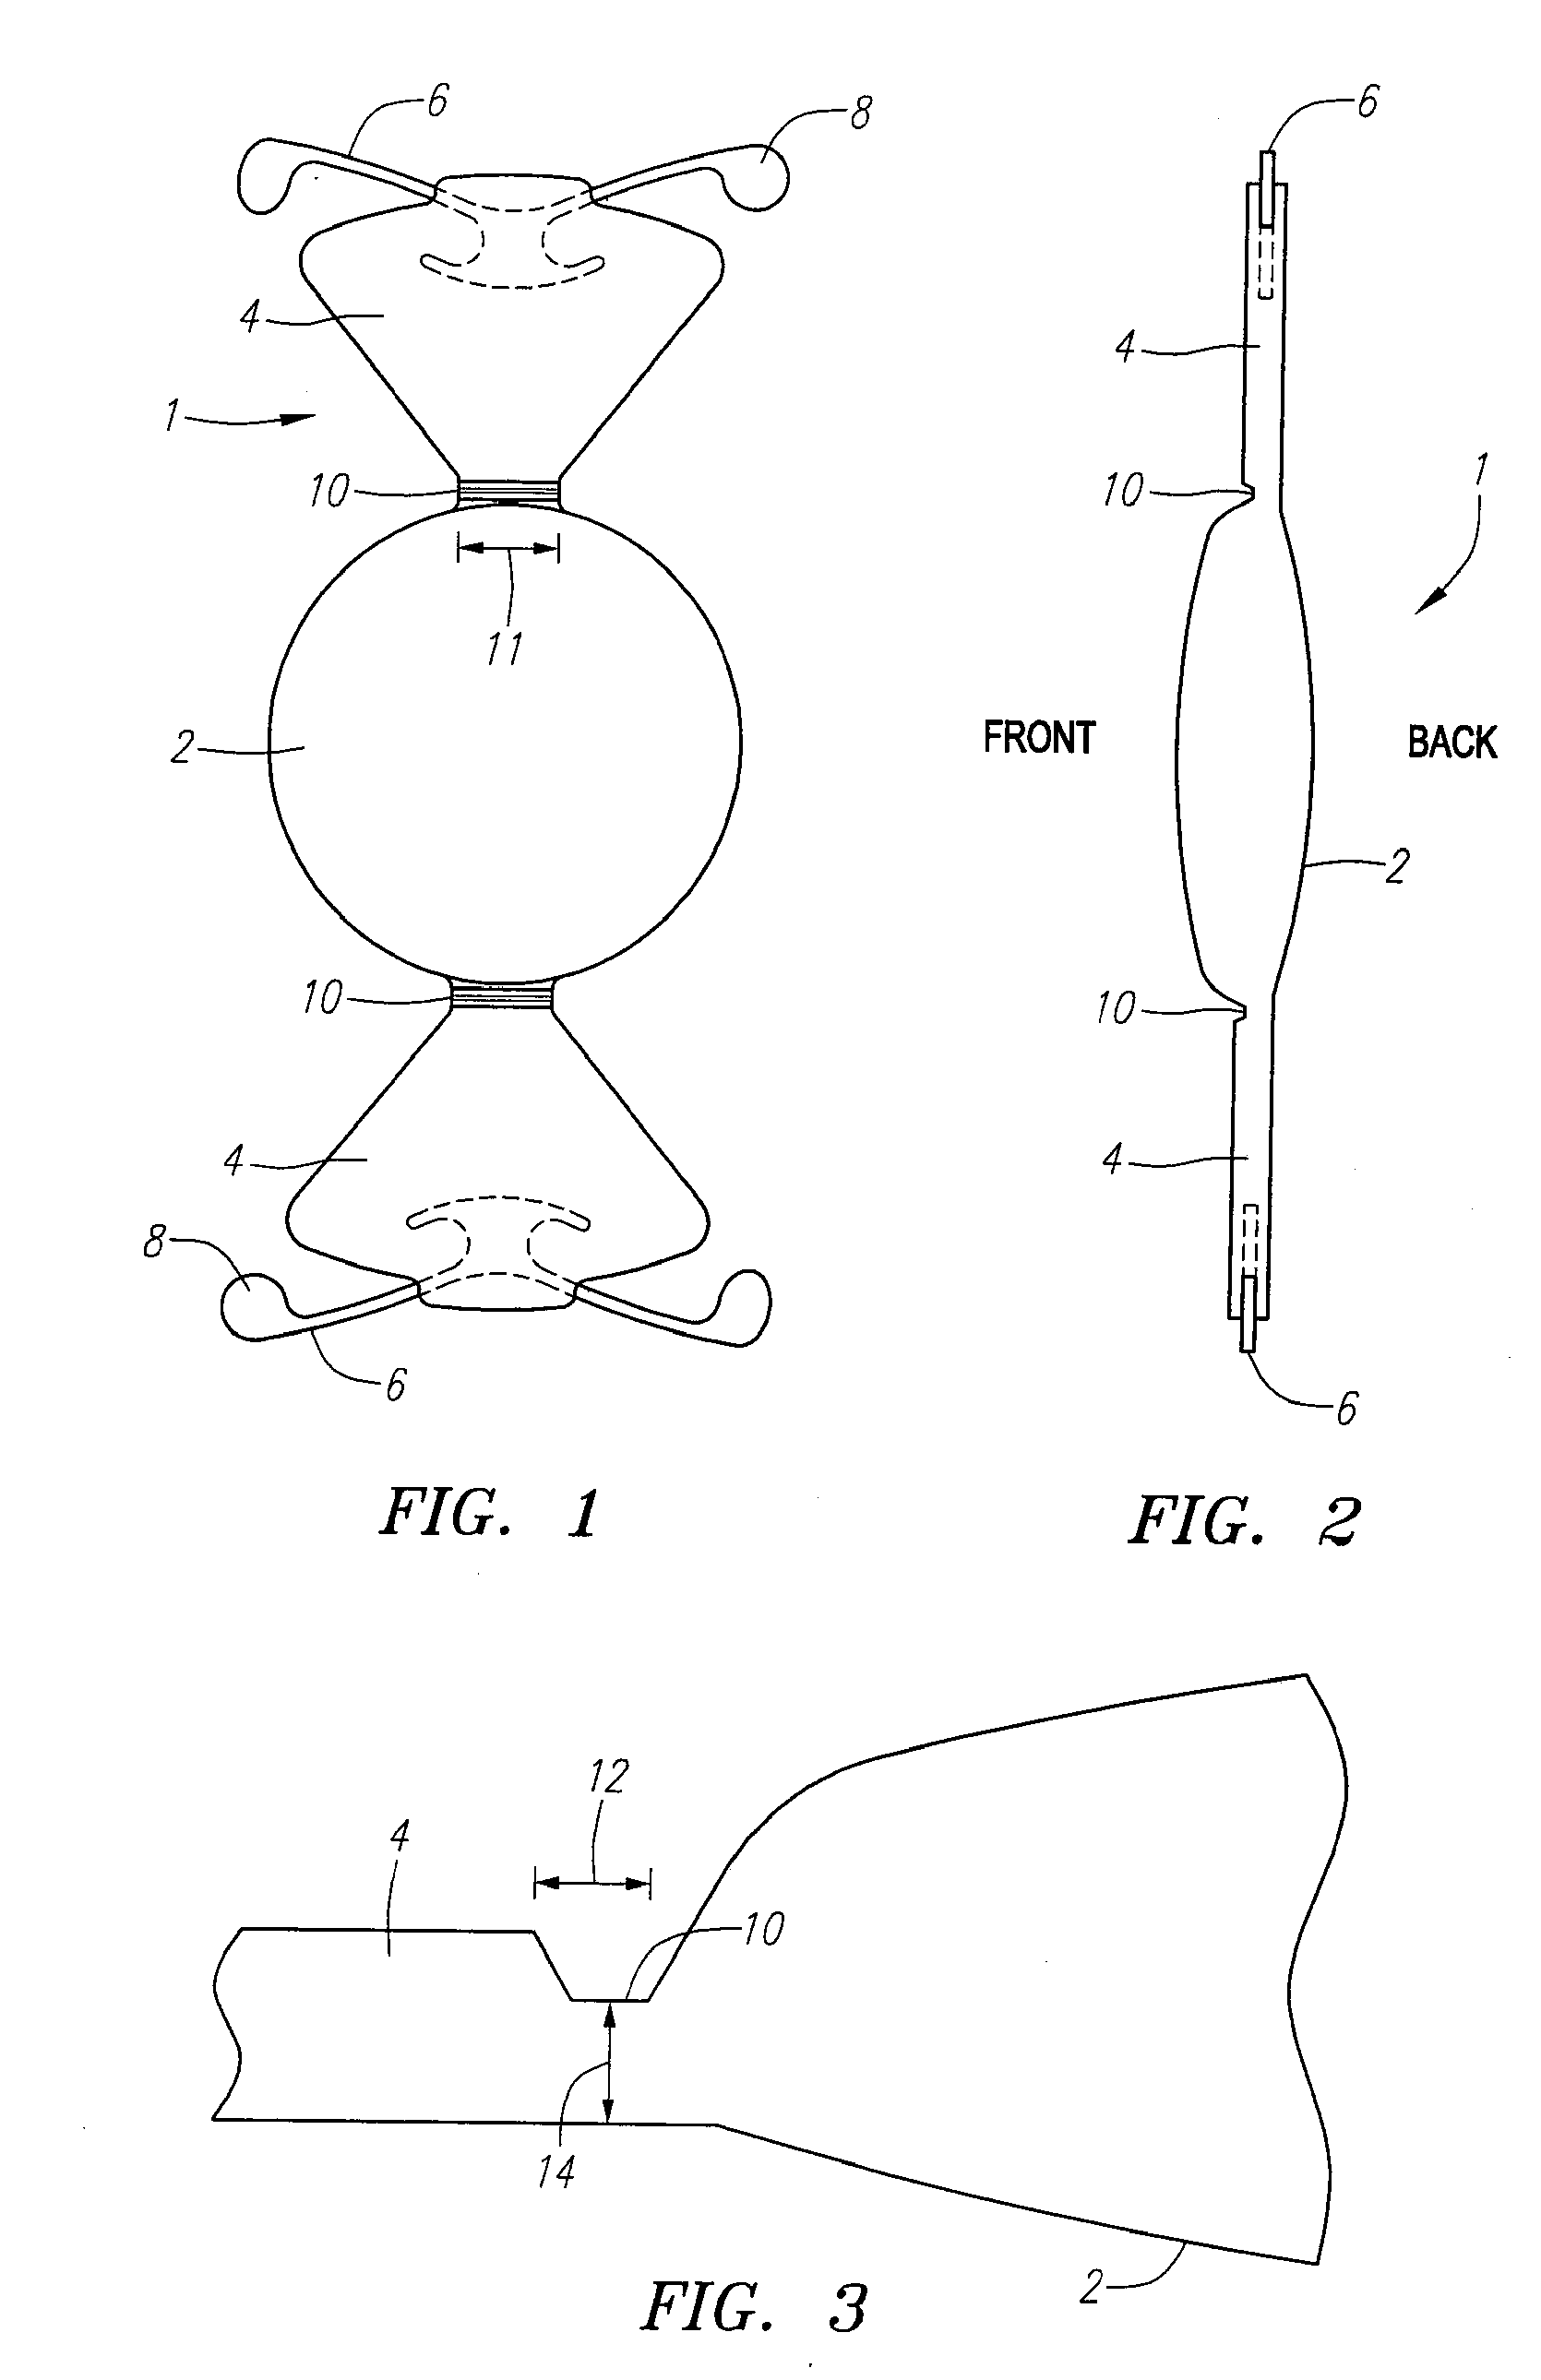 Stabilized accommodating intraocular lens